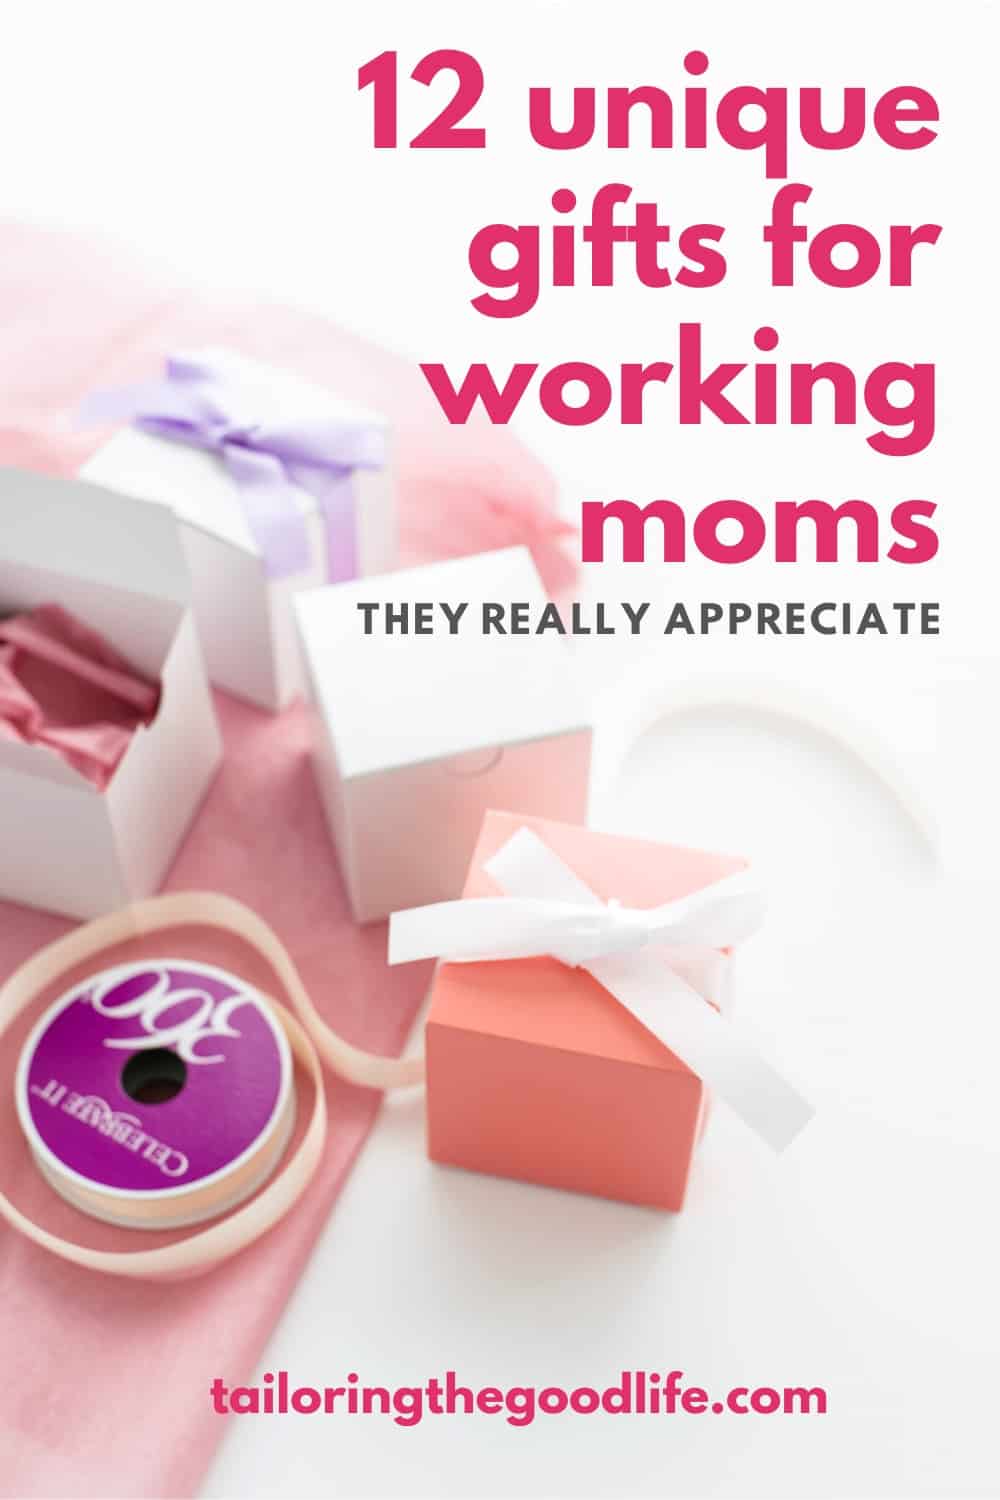 12 Unique Gifts for Working Moms They Really Appreciate